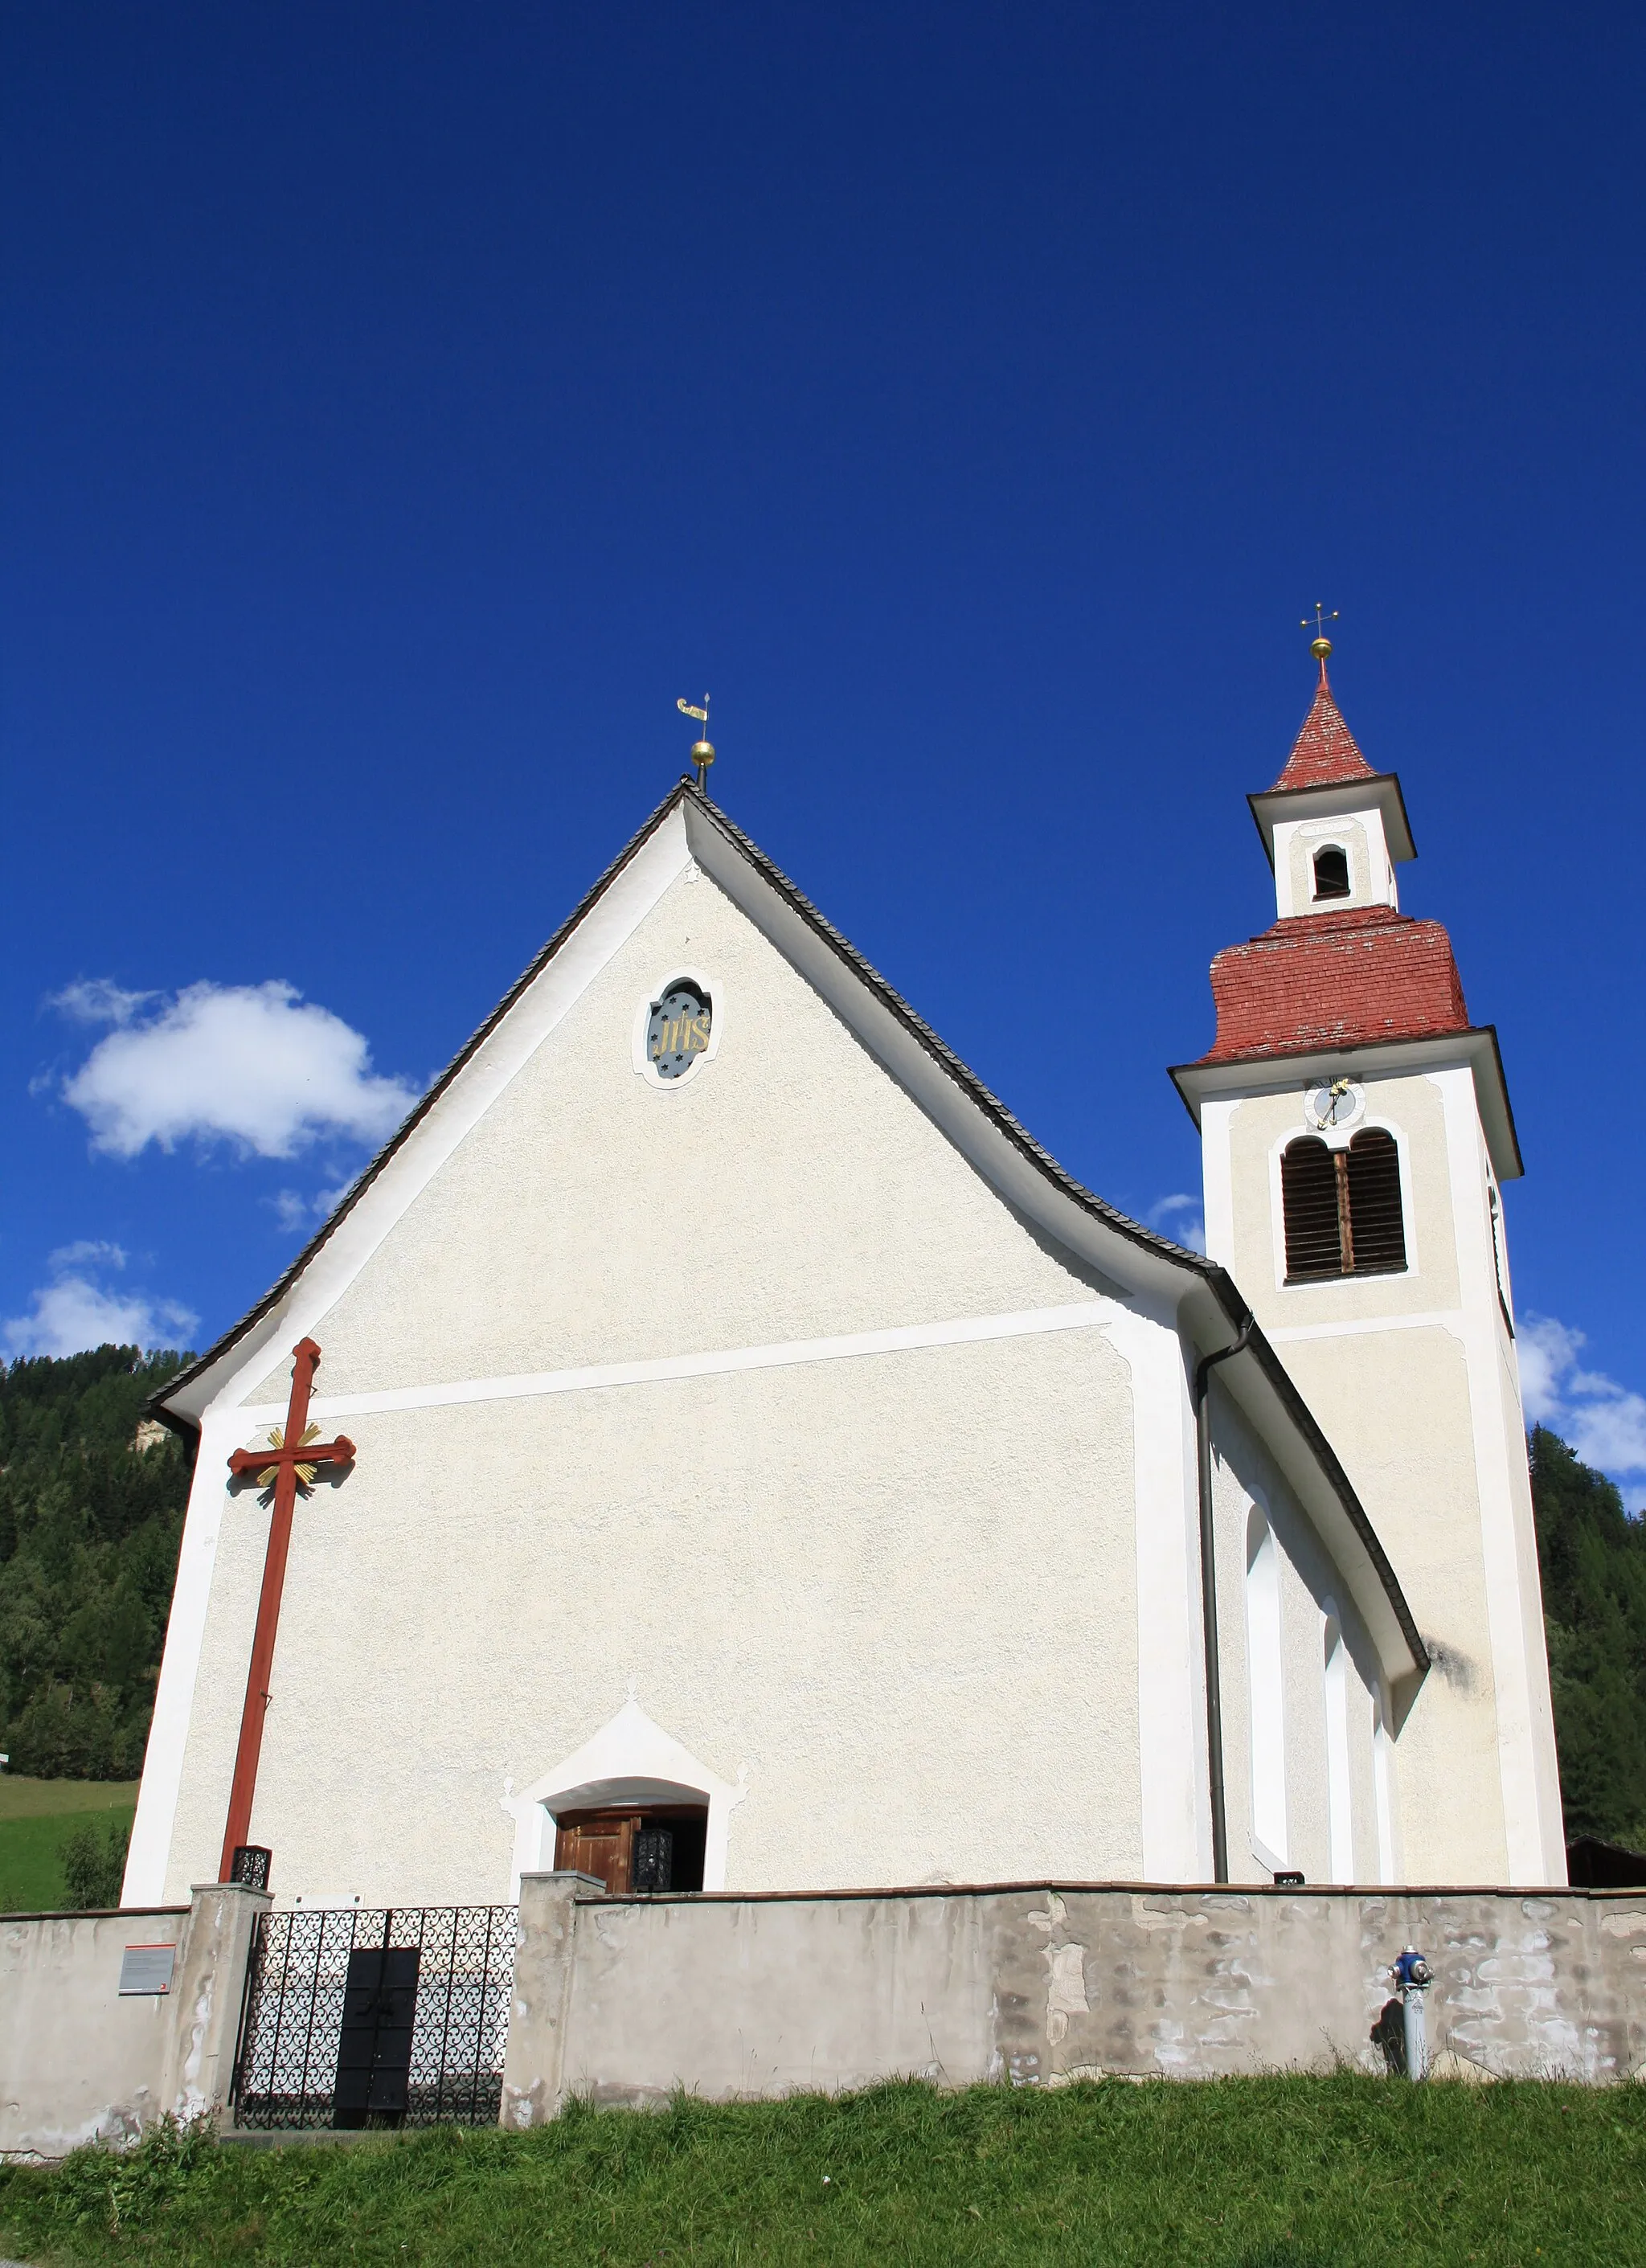 Photo showing: Italy, South Tirol, St. Jakob in Innerpfitsch, Pfarrkirche zum Hl. Jakobus. The church was built between 1821 and 1824 under the direction of the curate Jakob Prantl who built 13 churches throughout Tyrol. The ceiling frescoes depict the Most Holy Sacrament and the decapitation of St. James are by Josef Renzler dating from 1823. The three altarpieces represent St. James, the baptism of Jesus and Our Lady Queen of the Holy Rosary are by Leopold Puellacher between 1824 and 1825.